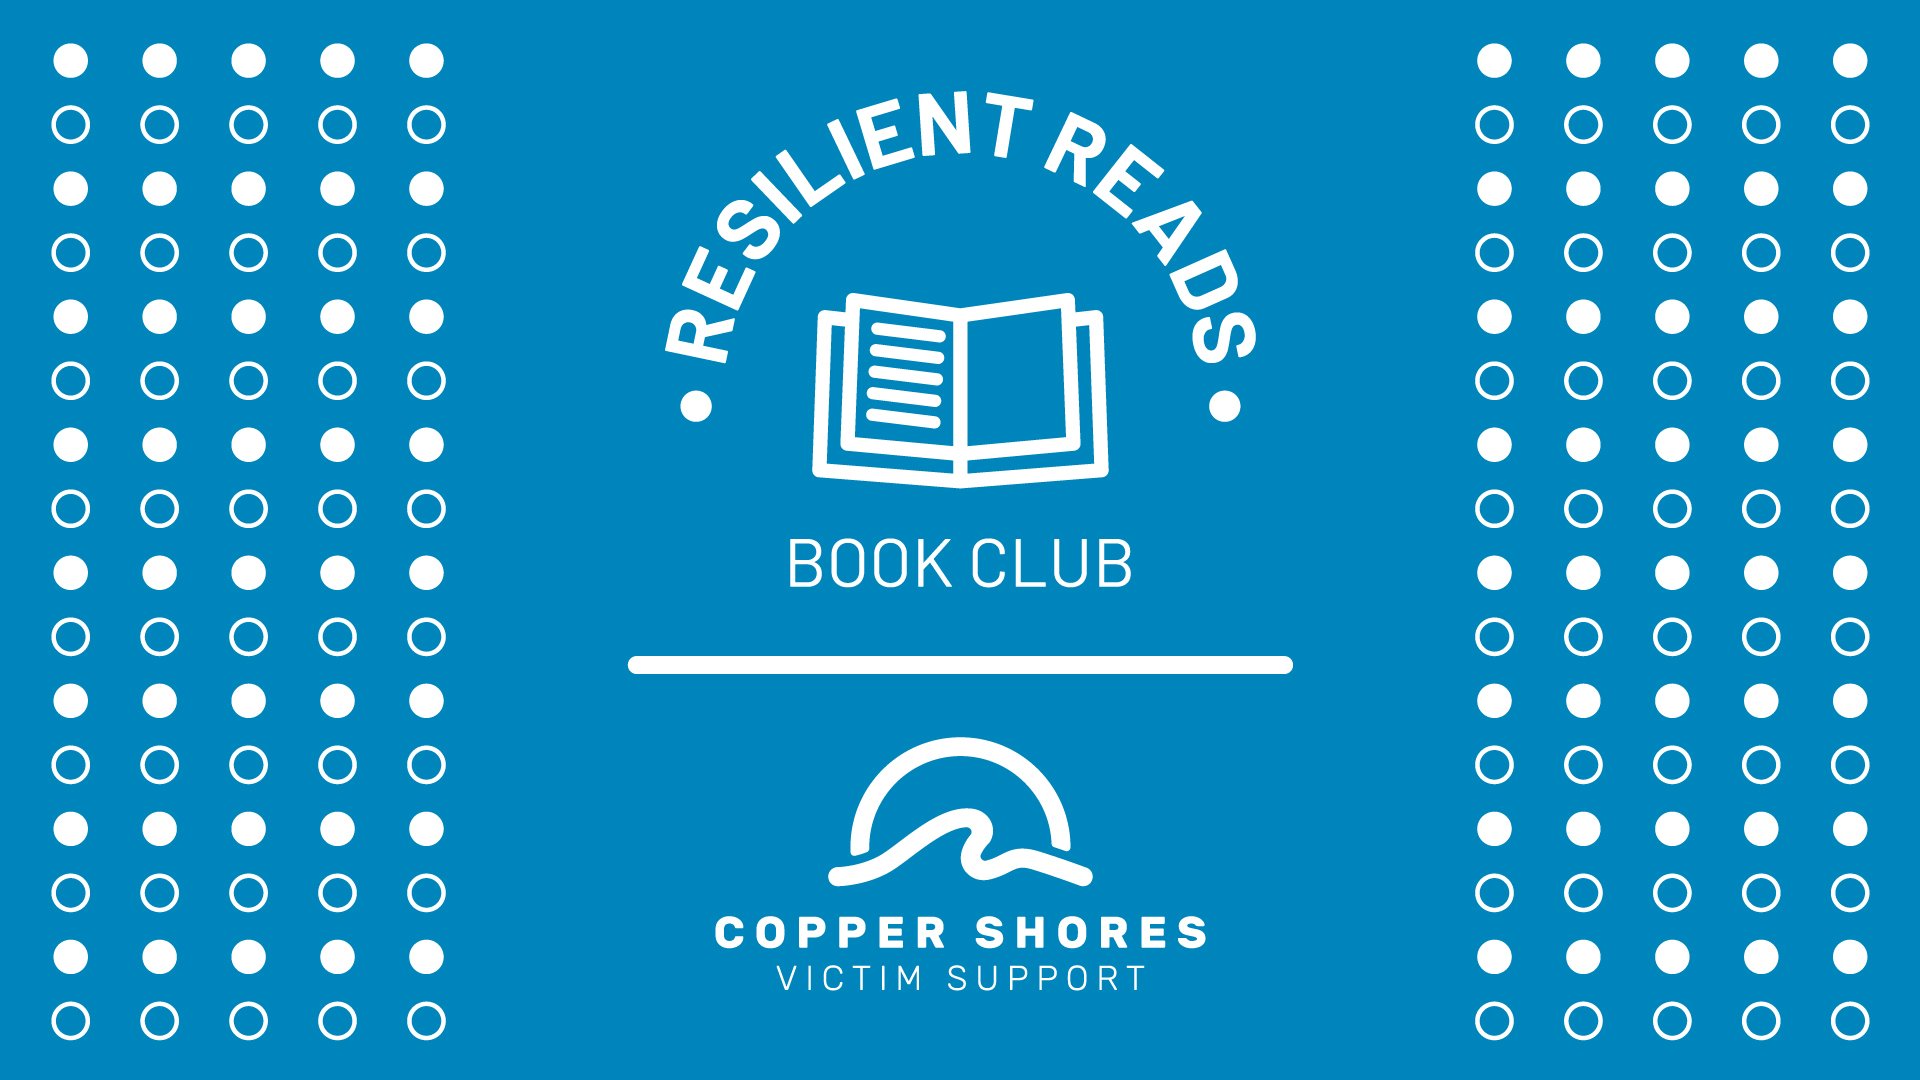 Resilient Reads Book Club - Featured Image